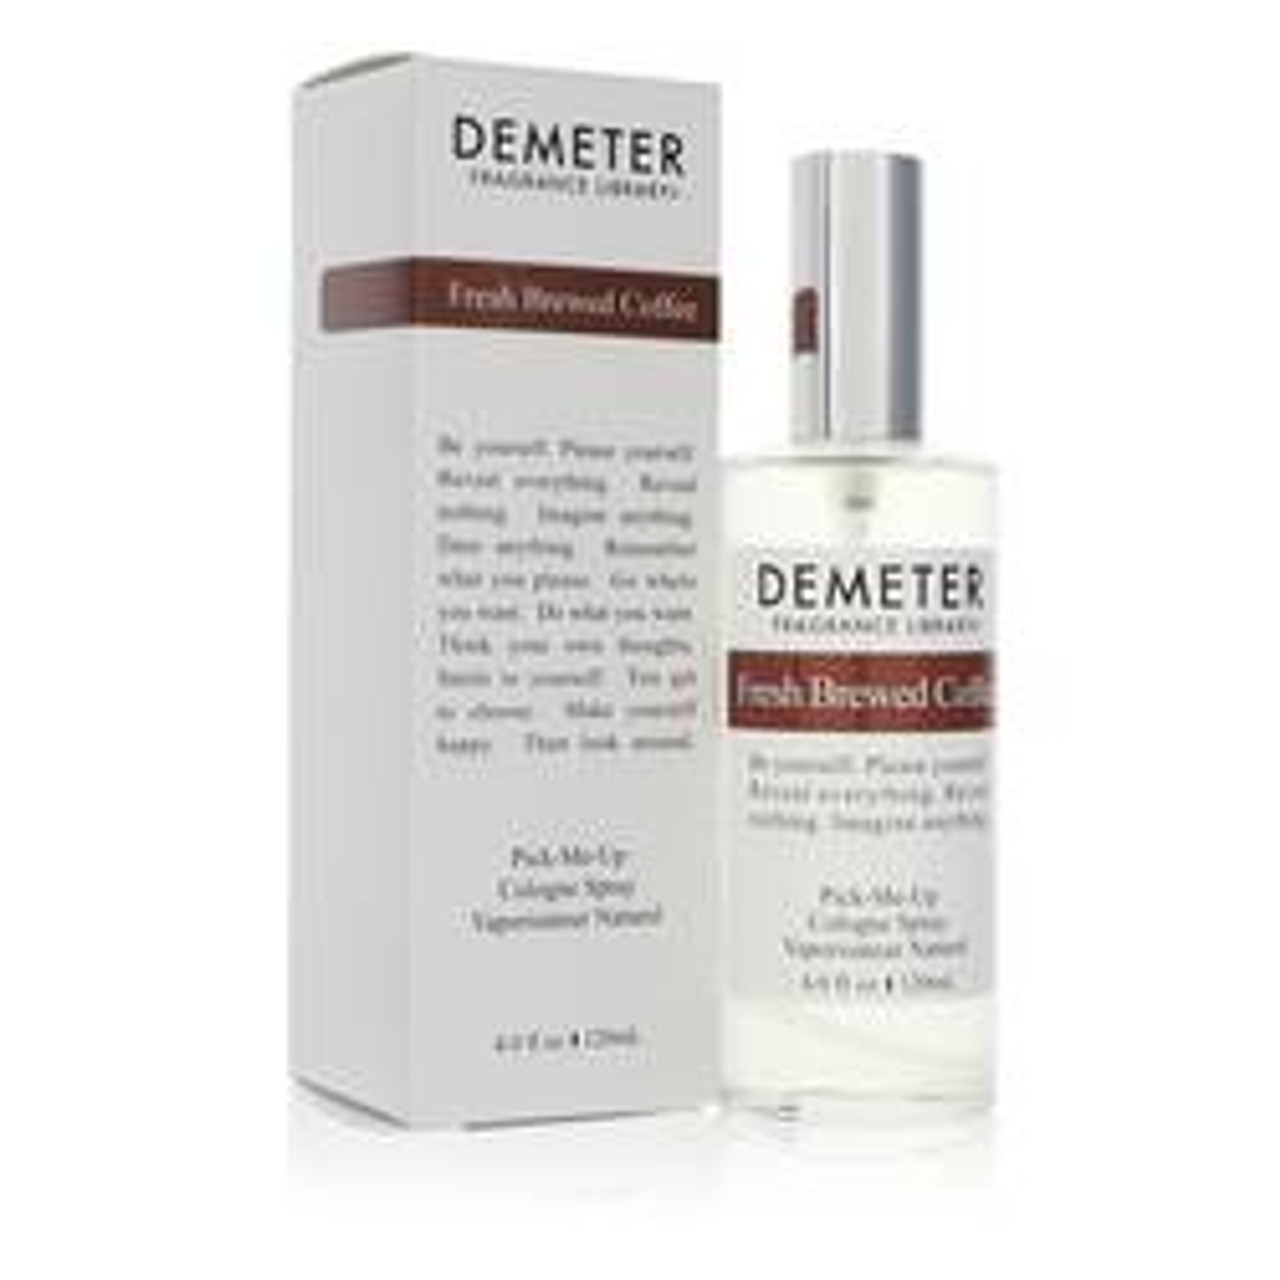 Demeter Fresh Brewed Coffee Perfume By Demeter Cologne Spray (Unisex) 4 oz for Women - [From 79.50 - Choose pk Qty ] - *Ships from Miami